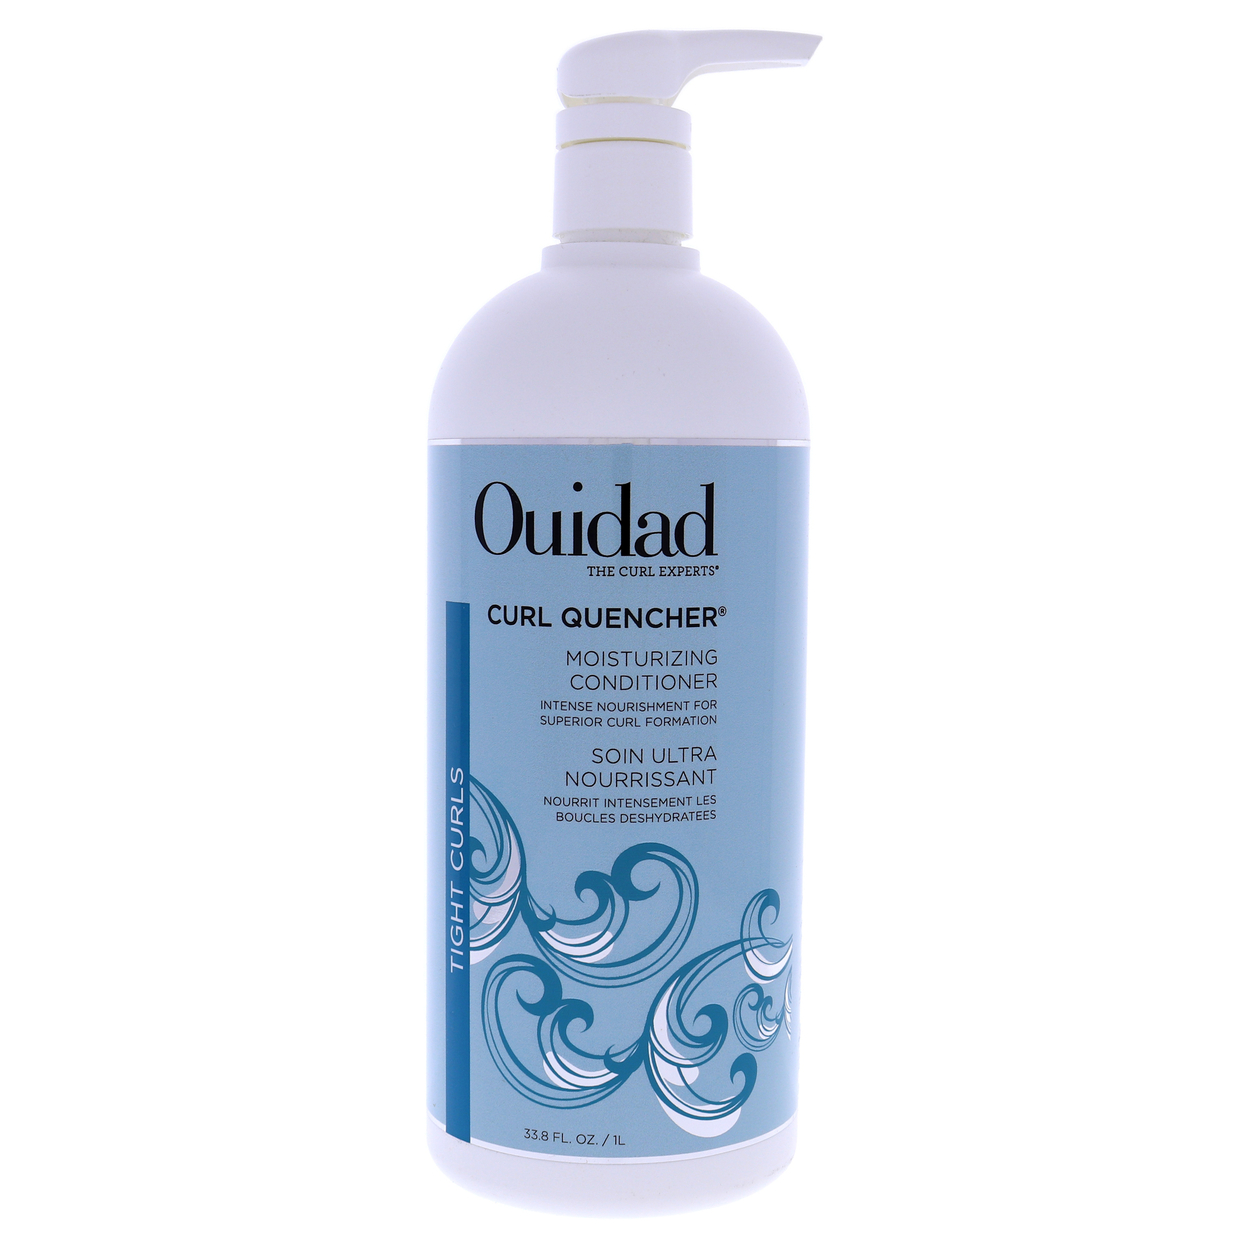 Ouidad Unisex HAIRCARE Curl Quencher Moisturizing Conditioner 33.8 Oz